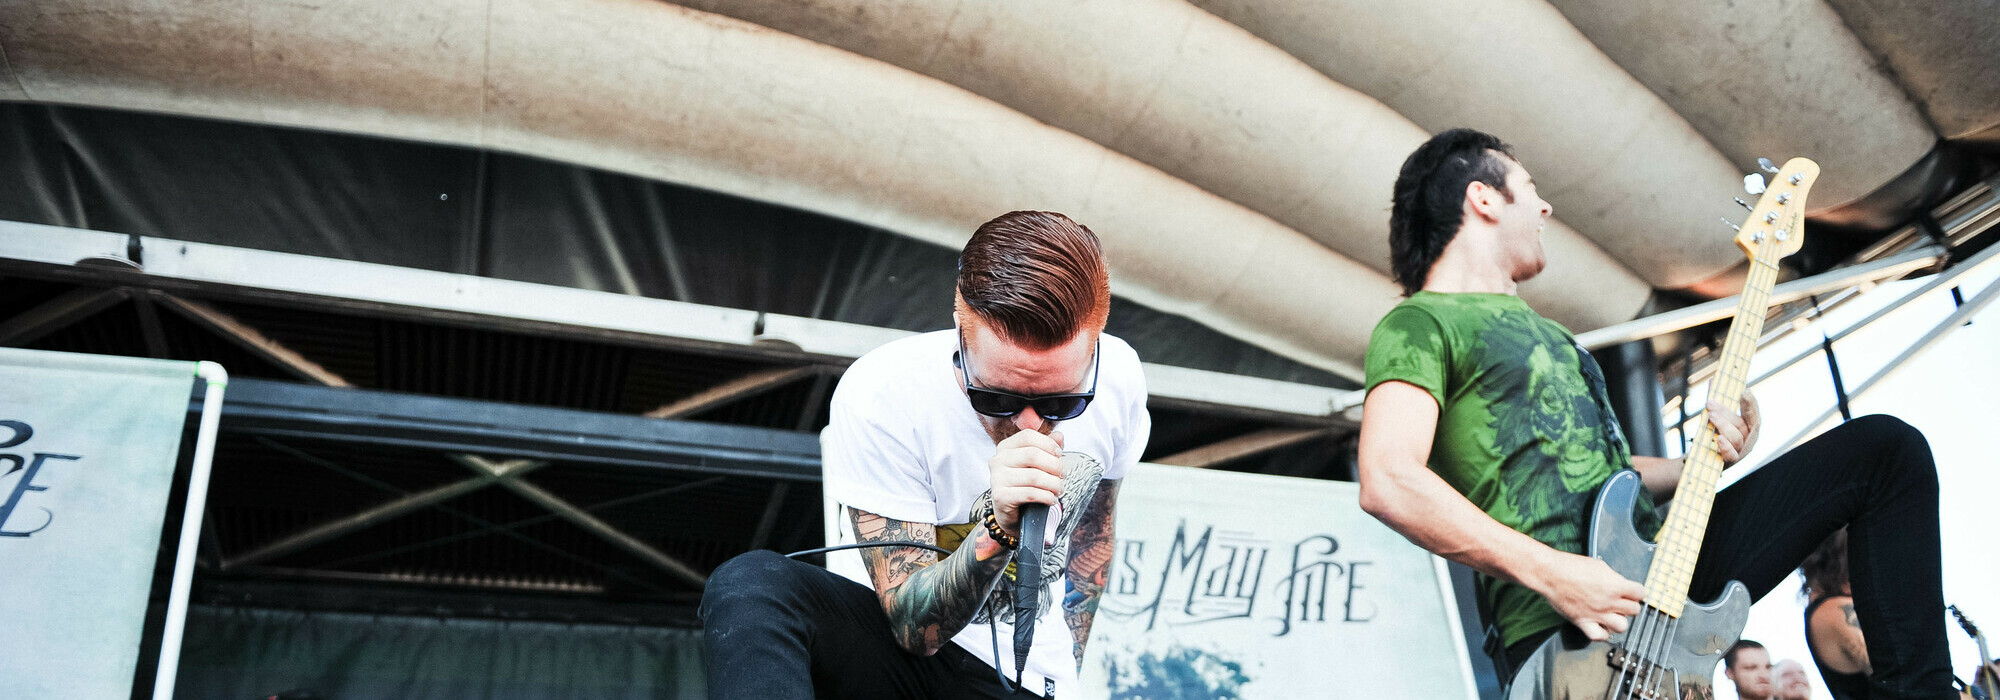 A Memphis May Fire live event